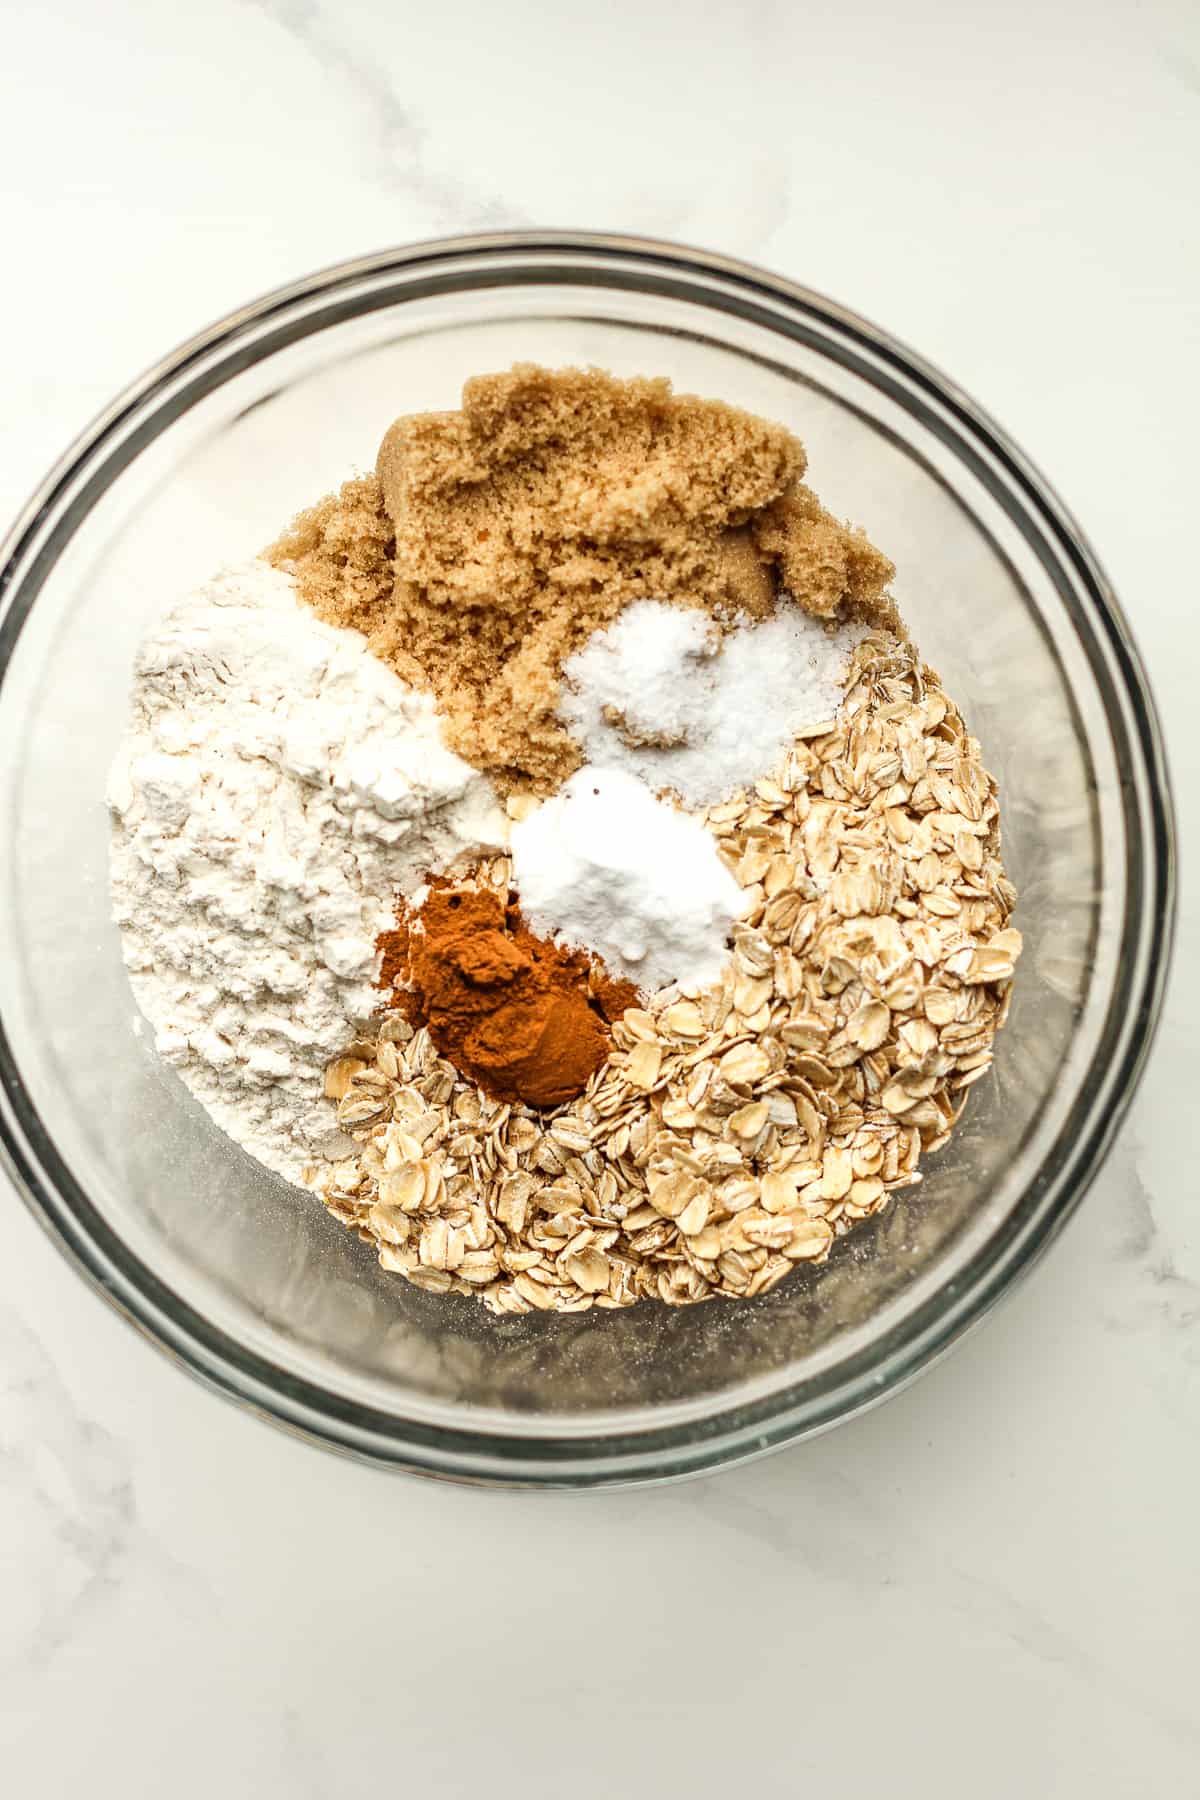 The oatmeal mixture in a glass bowl before stirring together.